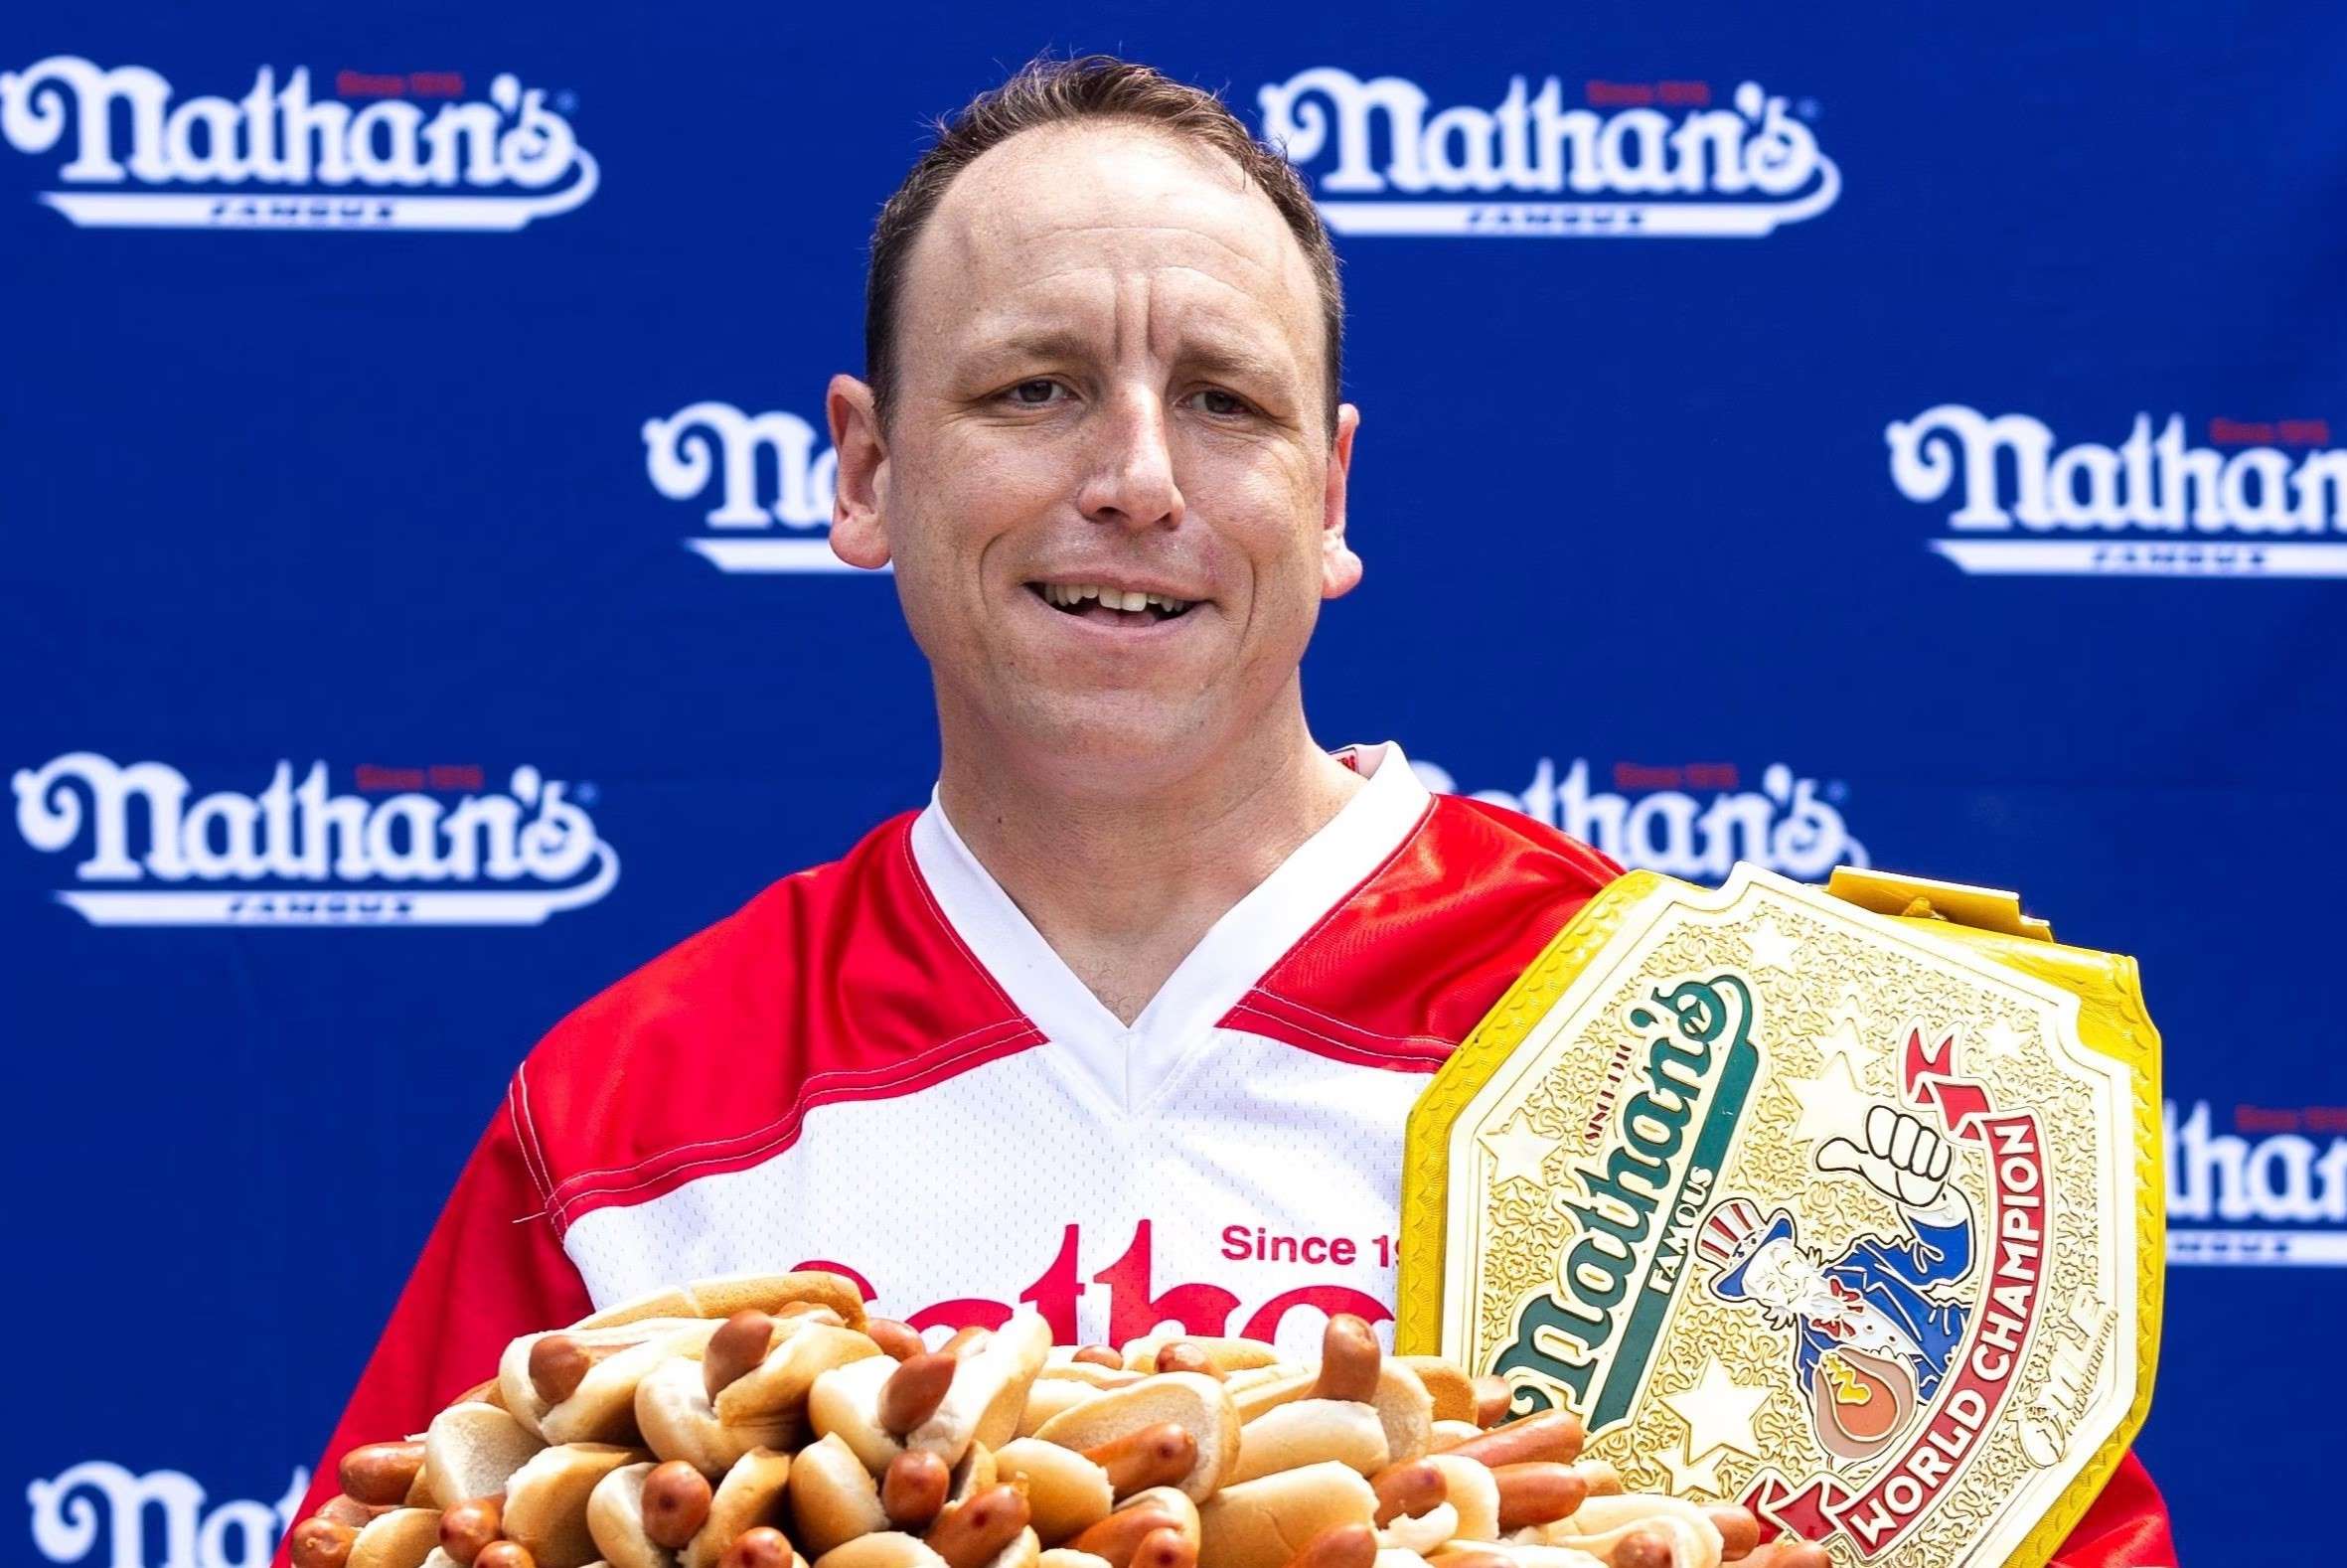 12-astonishing-facts-about-joey-chestnut